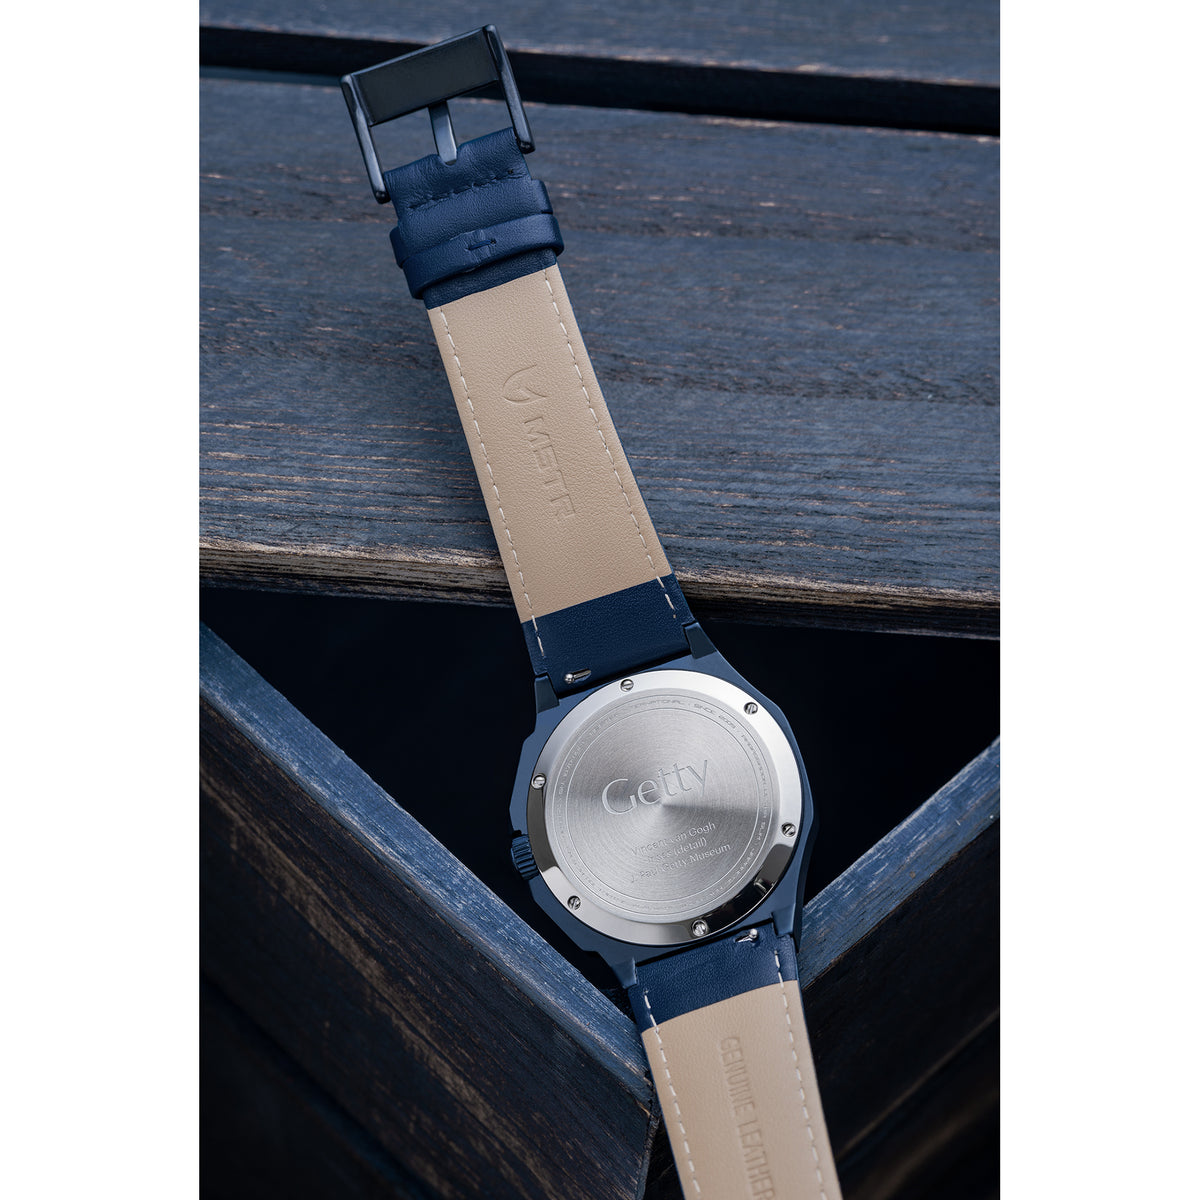 Van Gogh Irises Watch with Leather Band